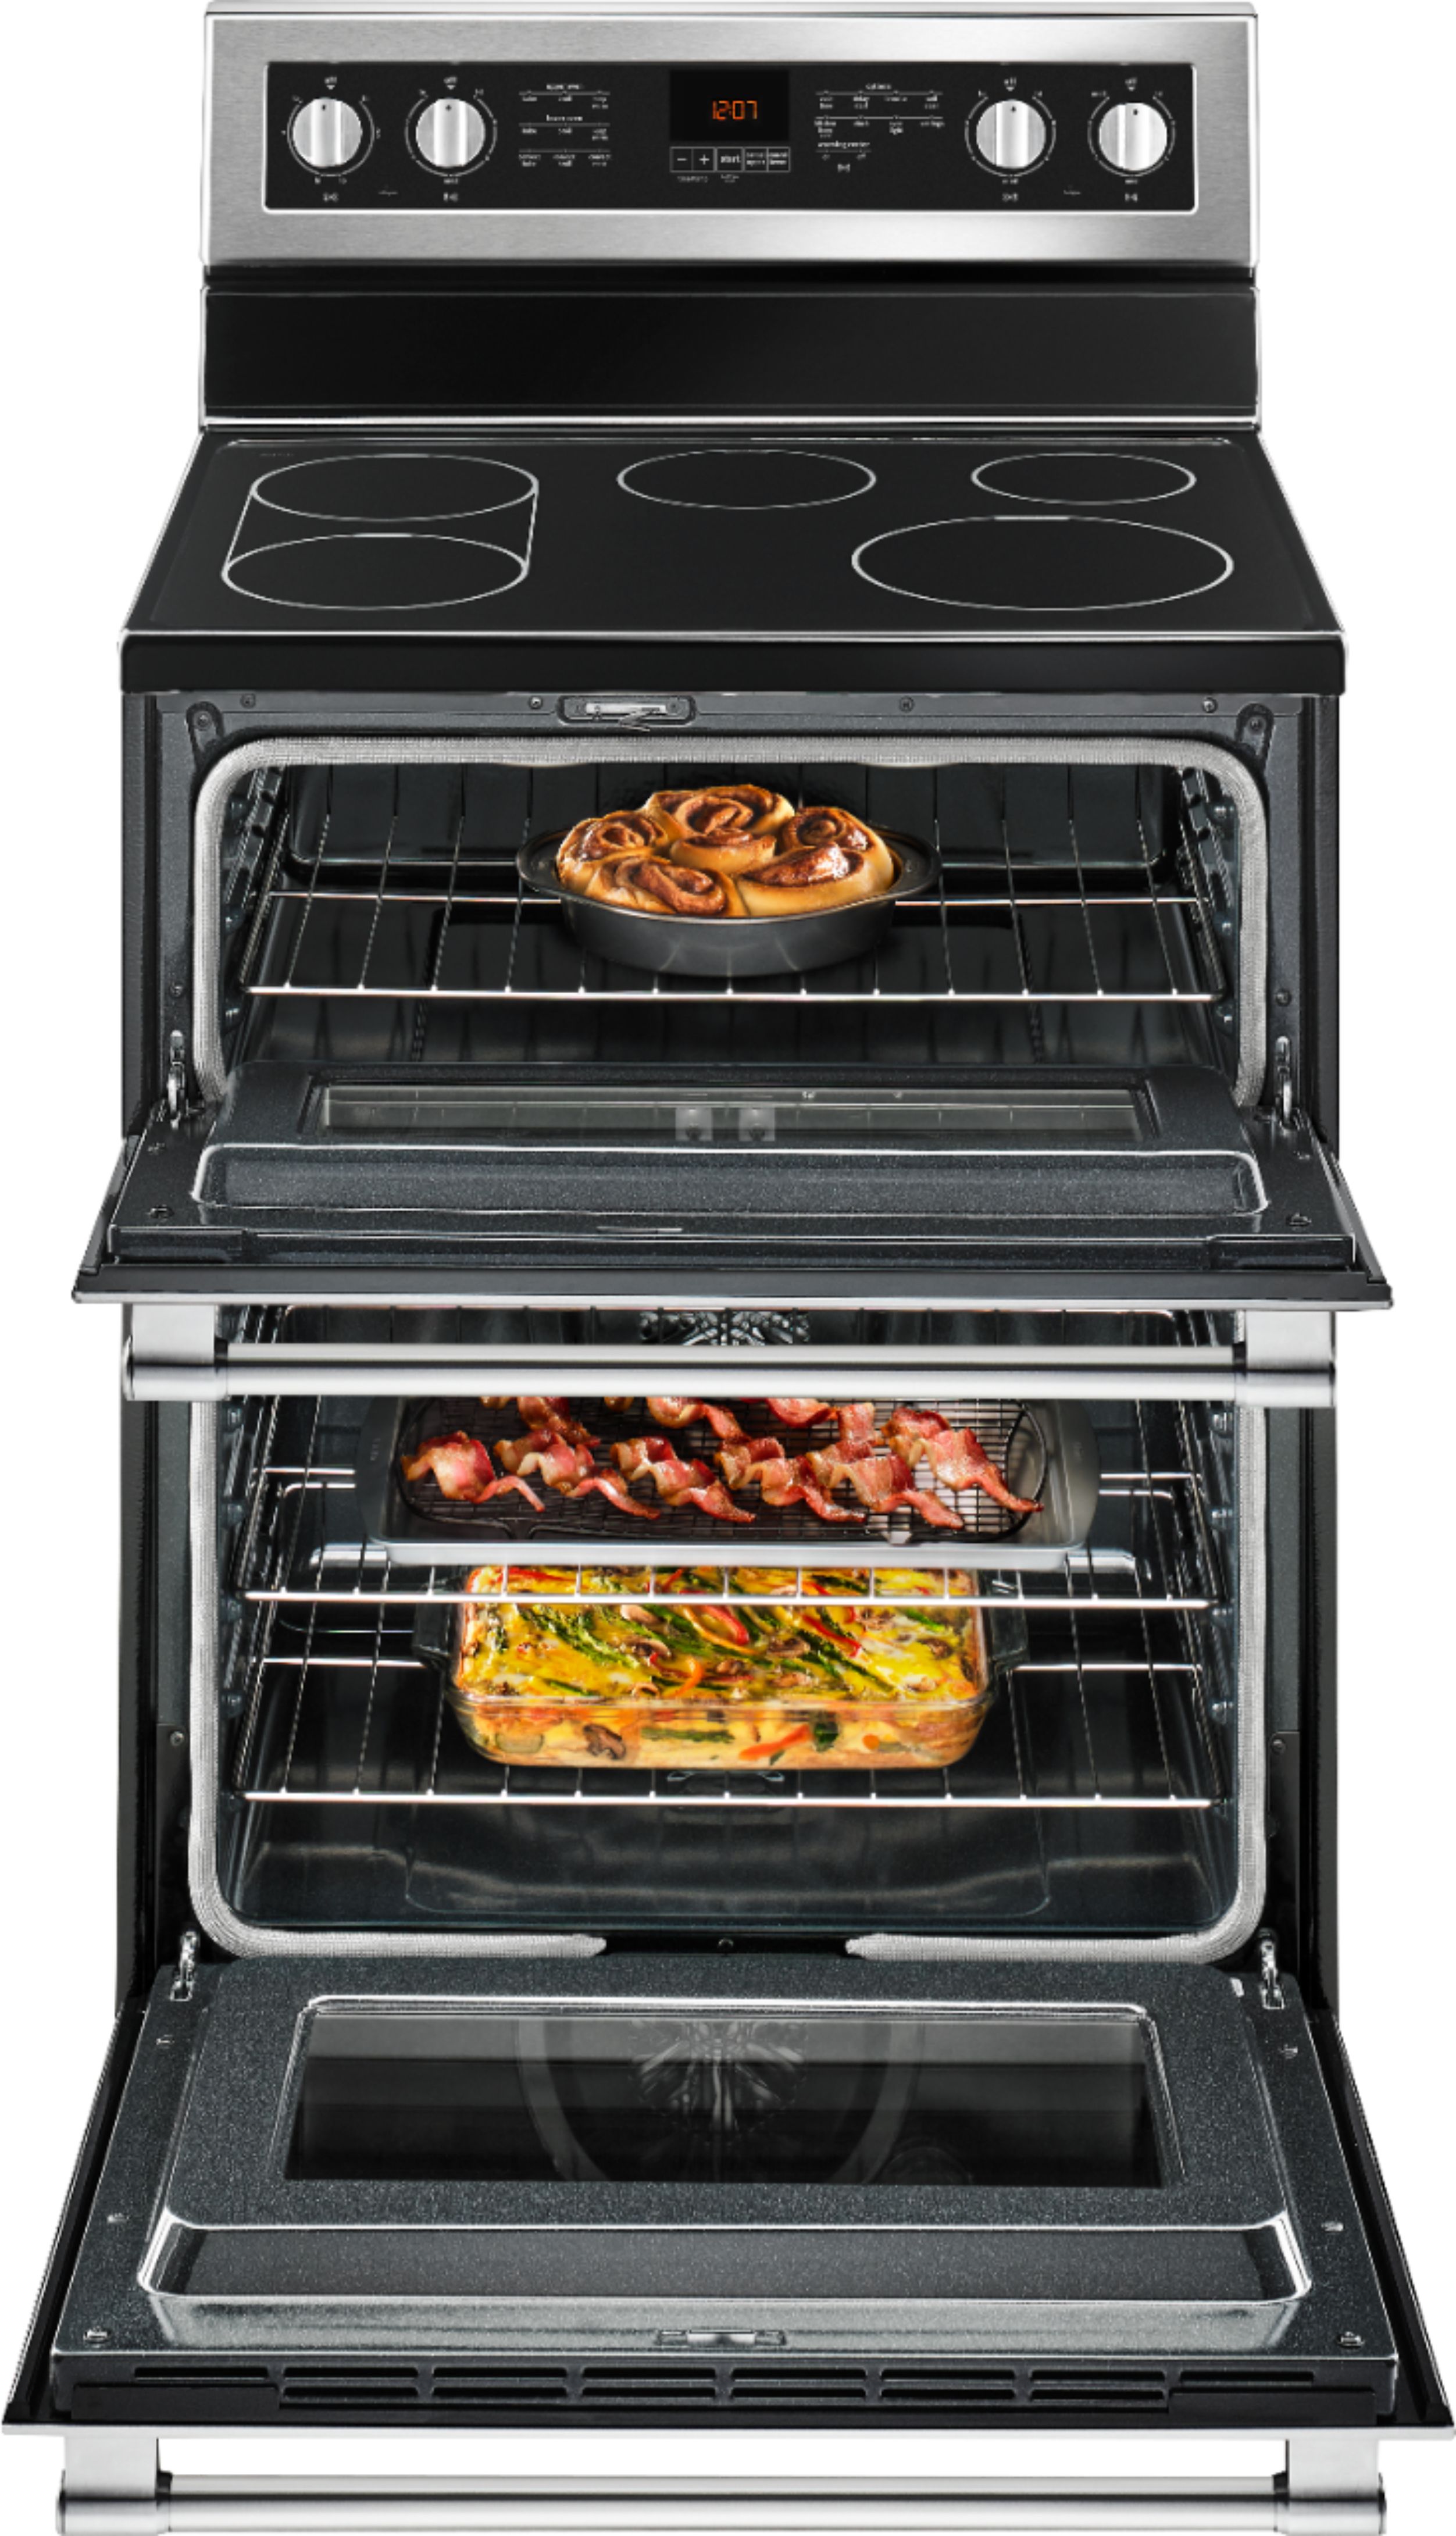 Maytag Double Oven Electric Range With Convection Oven In Fingerprint